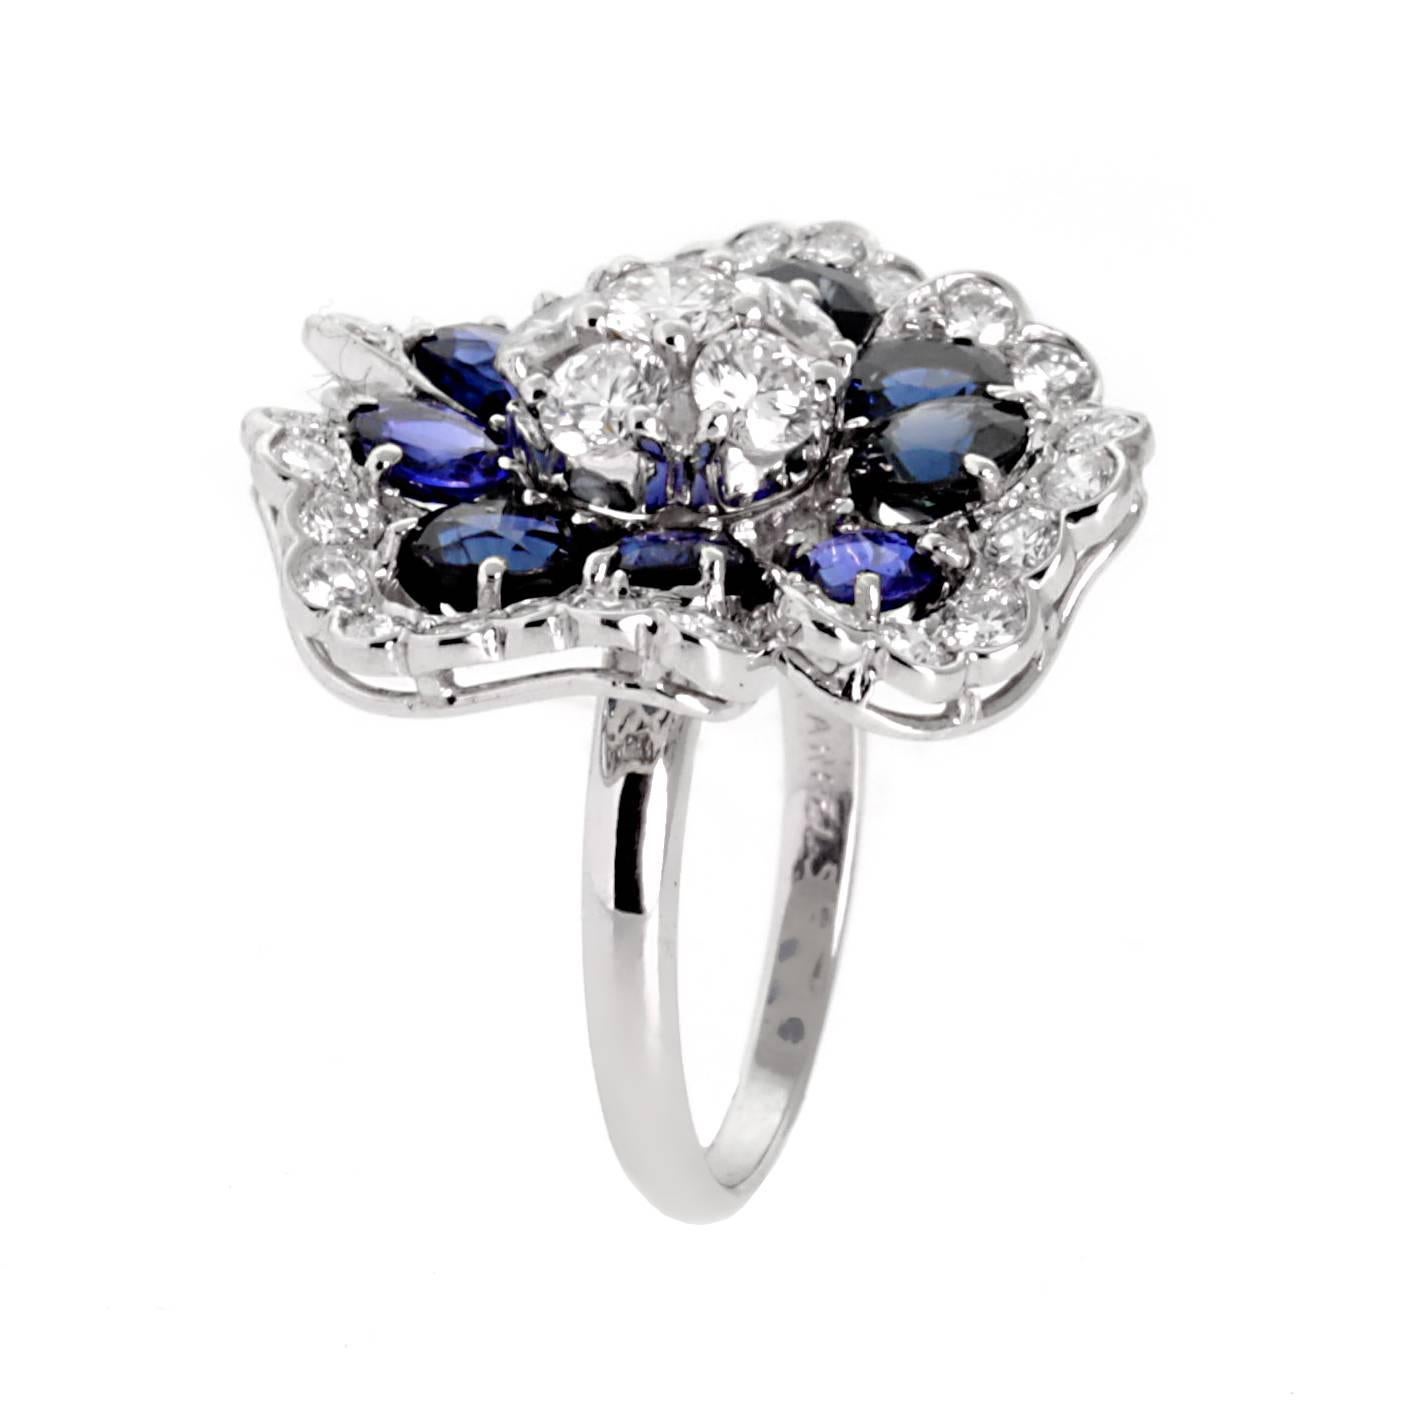 A fabulous Van Cleef & Arpels blue sapphire and diamond ring in the shape of a Camellia flower set in 18k white gold.